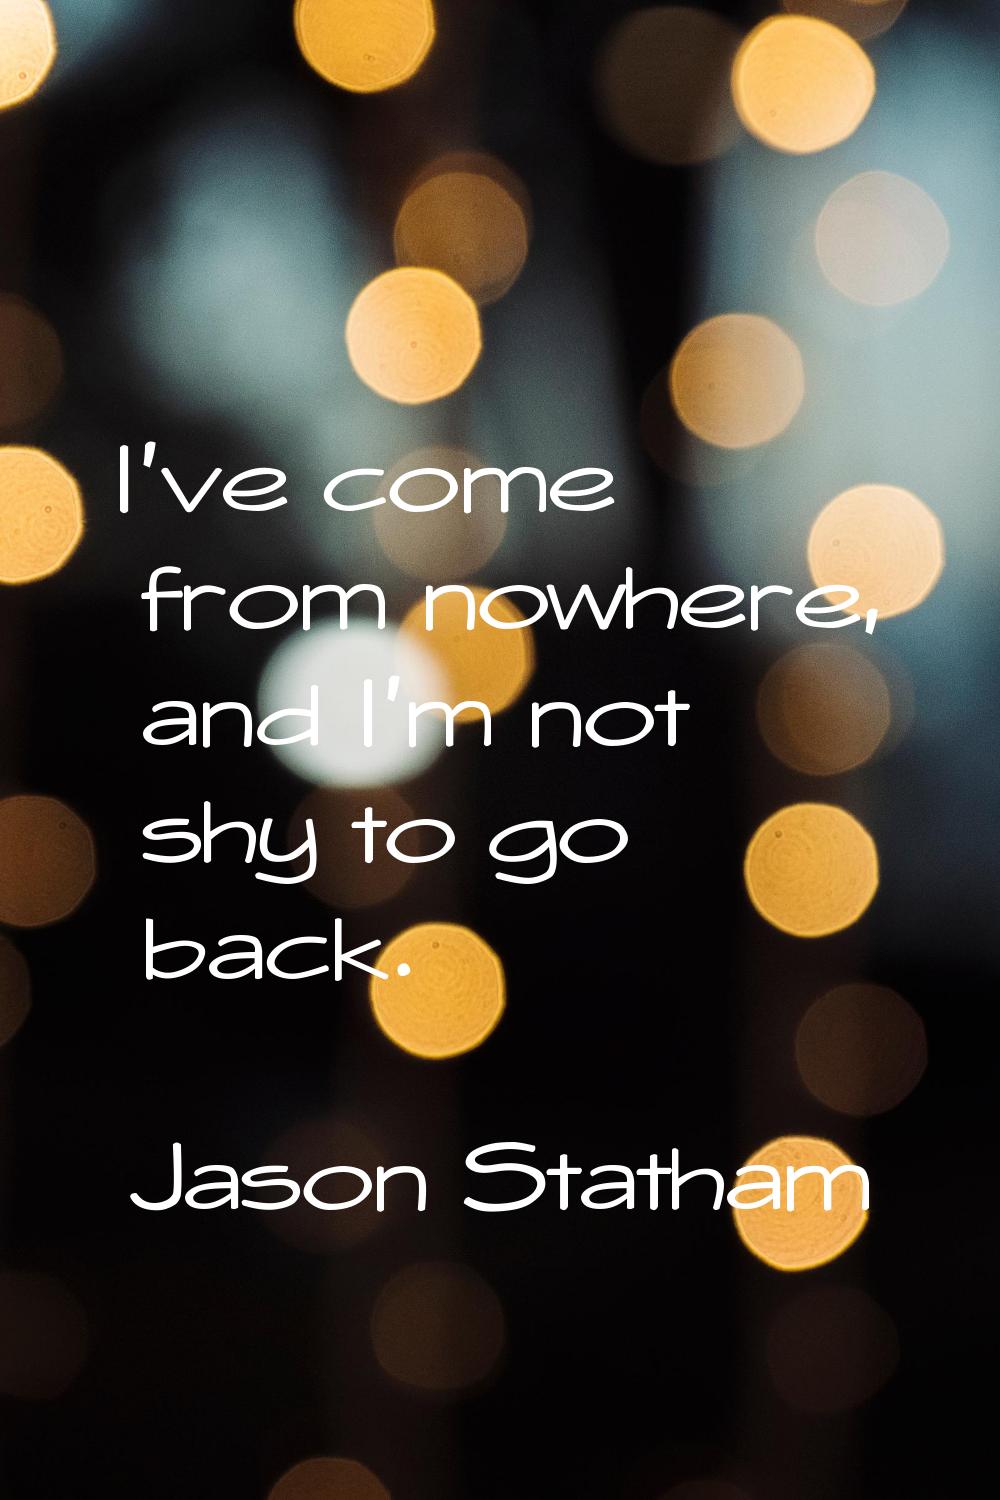 I've come from nowhere, and I'm not shy to go back.